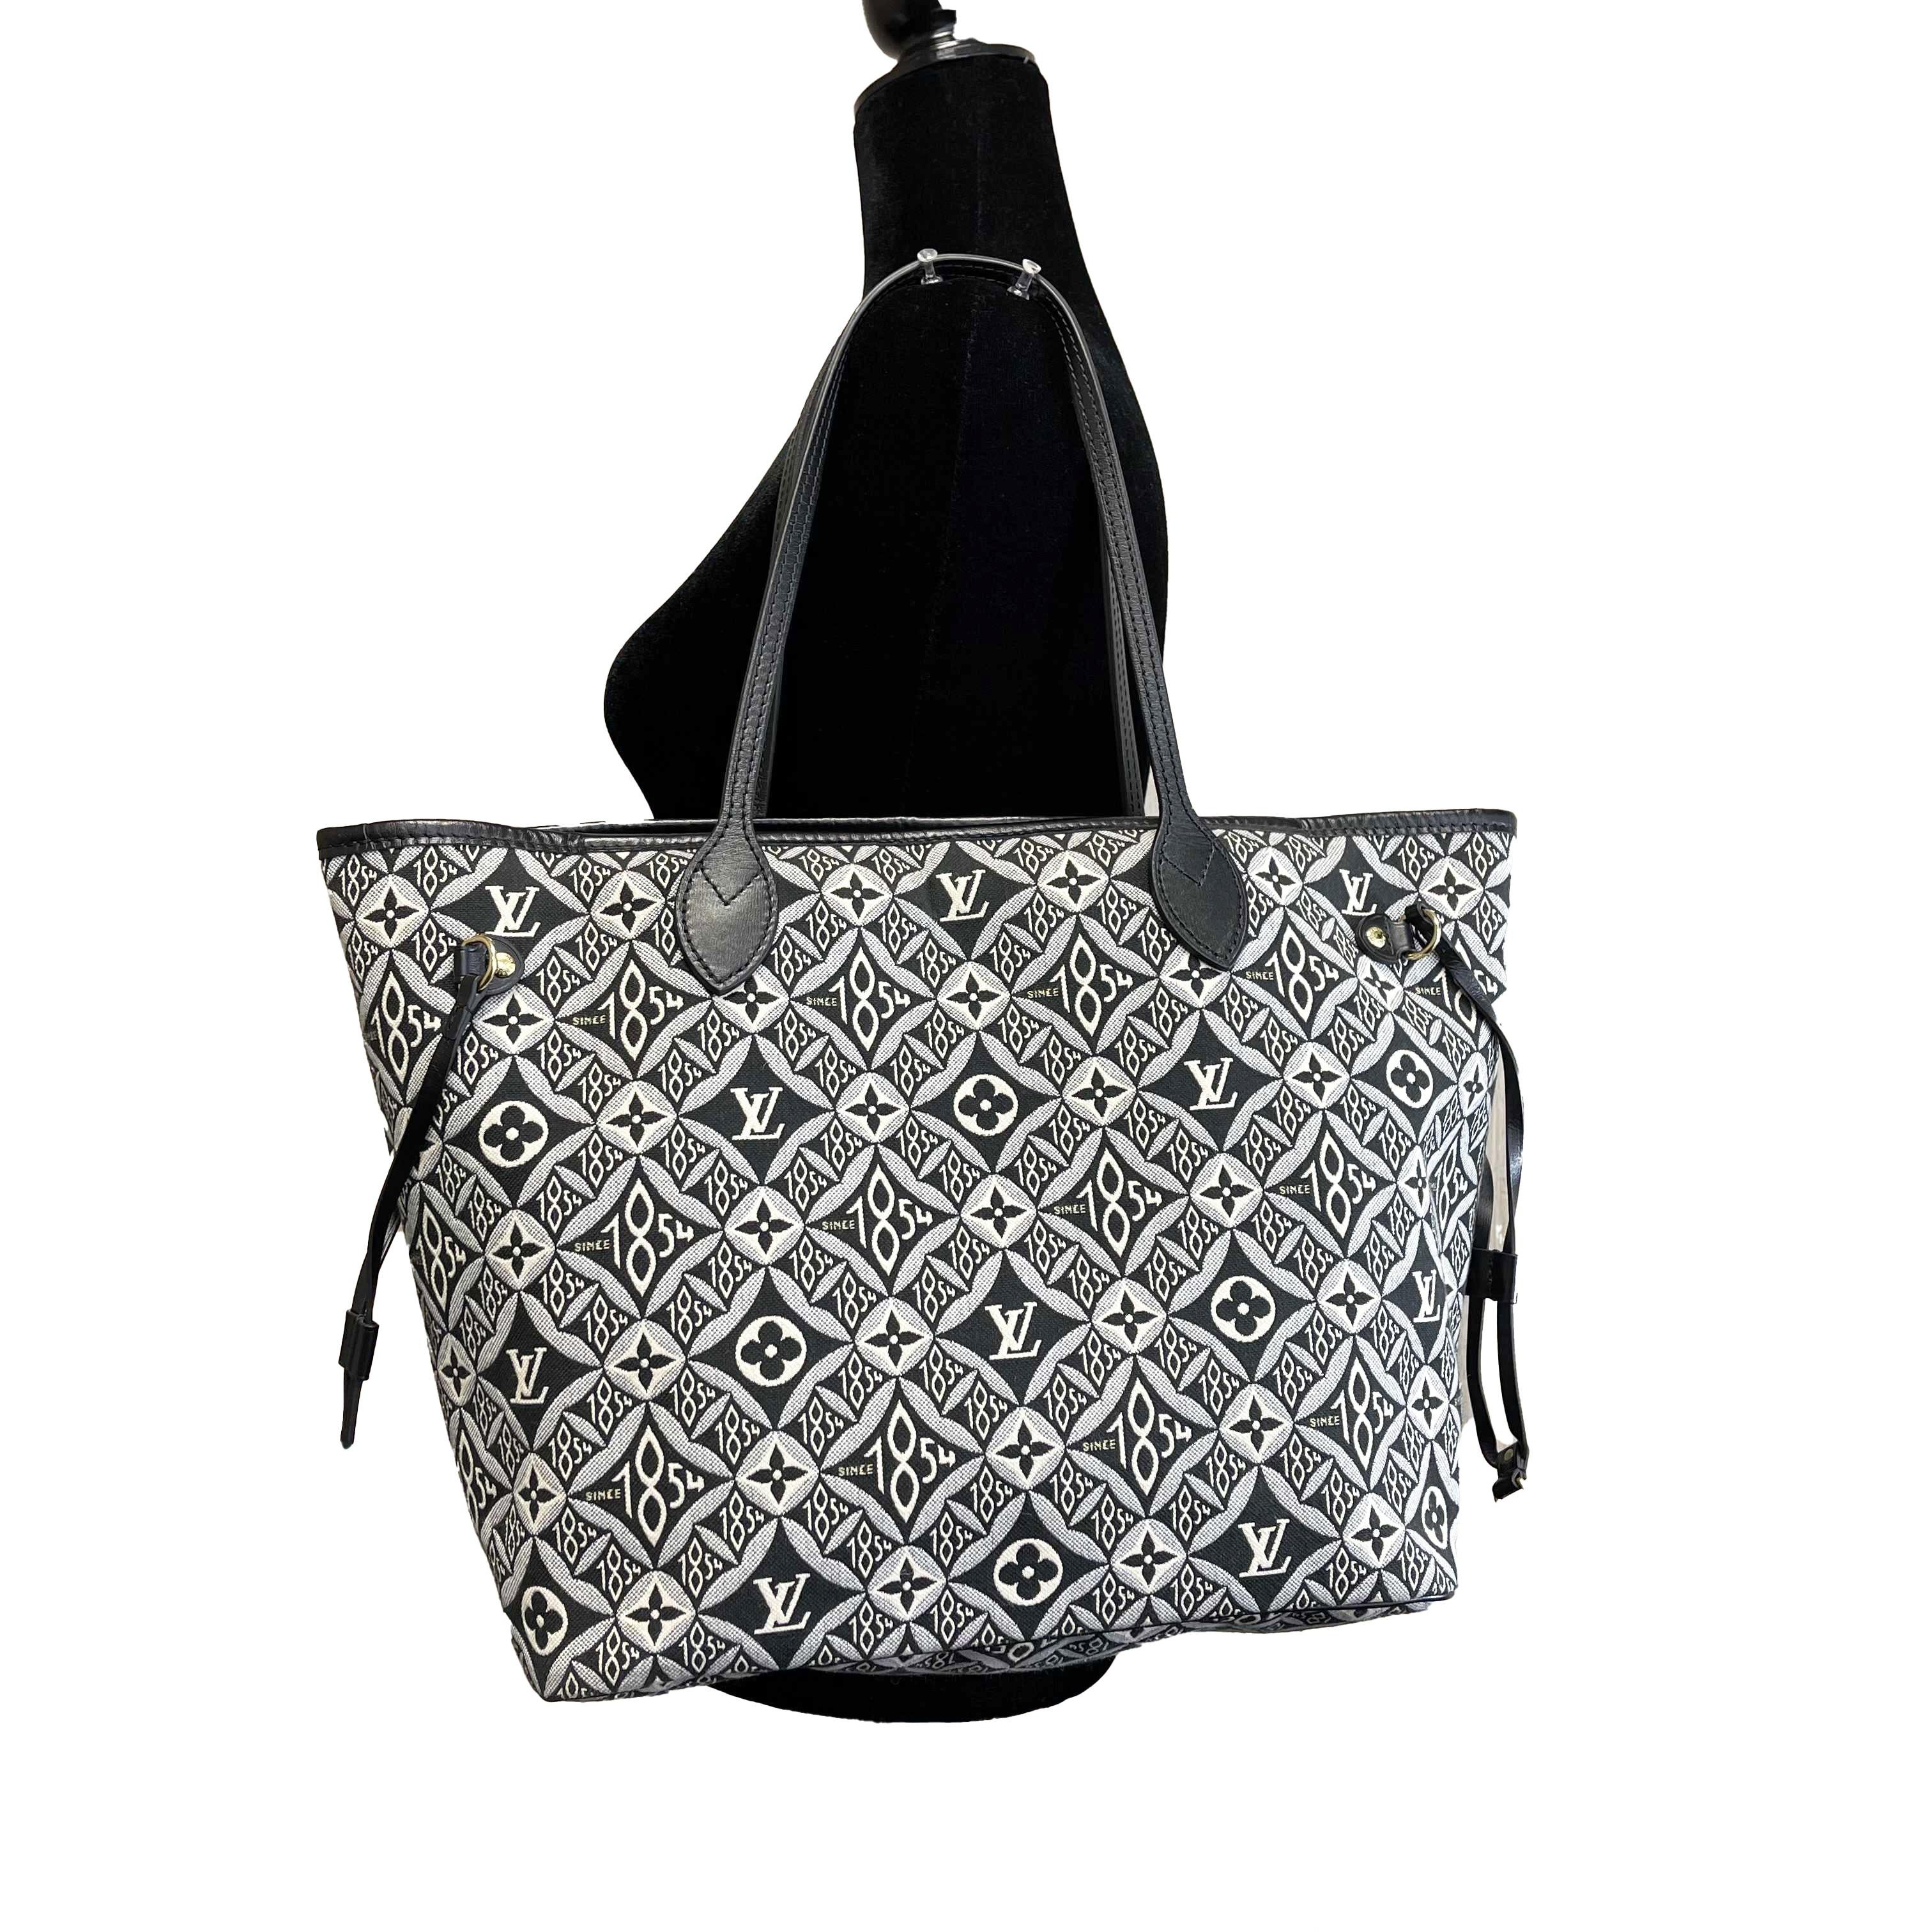 Louis Vuitton - Since 1854 Neverfull MM - Black / White Jacquard Tote w/ Pouch 3